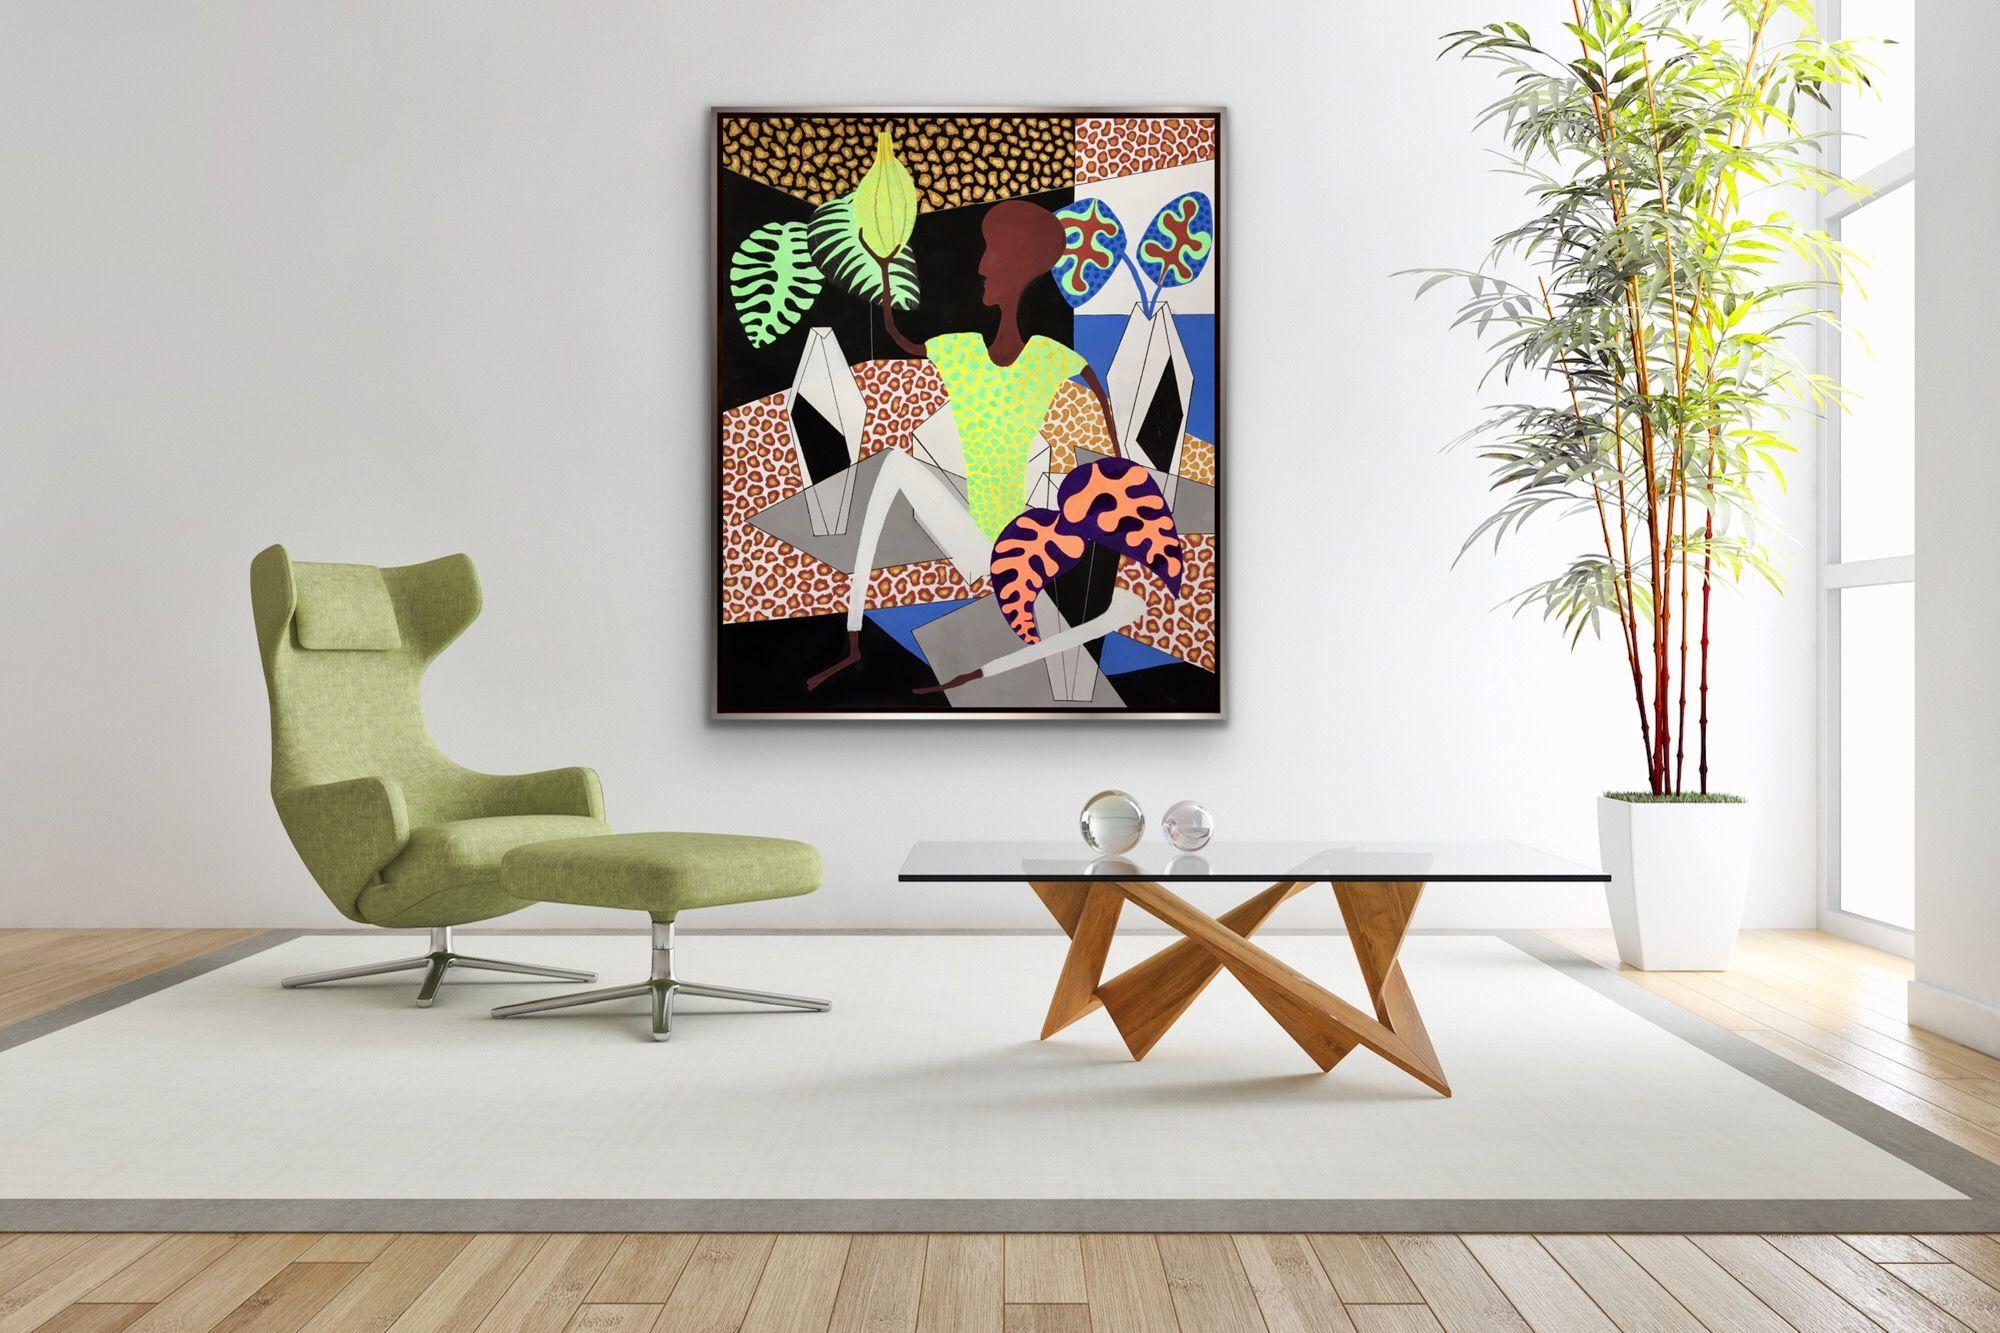 acrylic on the canvas, isnpired by African art and contemporary art directions. Expressing one african like figures holding bananas.  :: Painting :: Contemporary :: This piece comes with an official certificate of authenticity signed by the artist